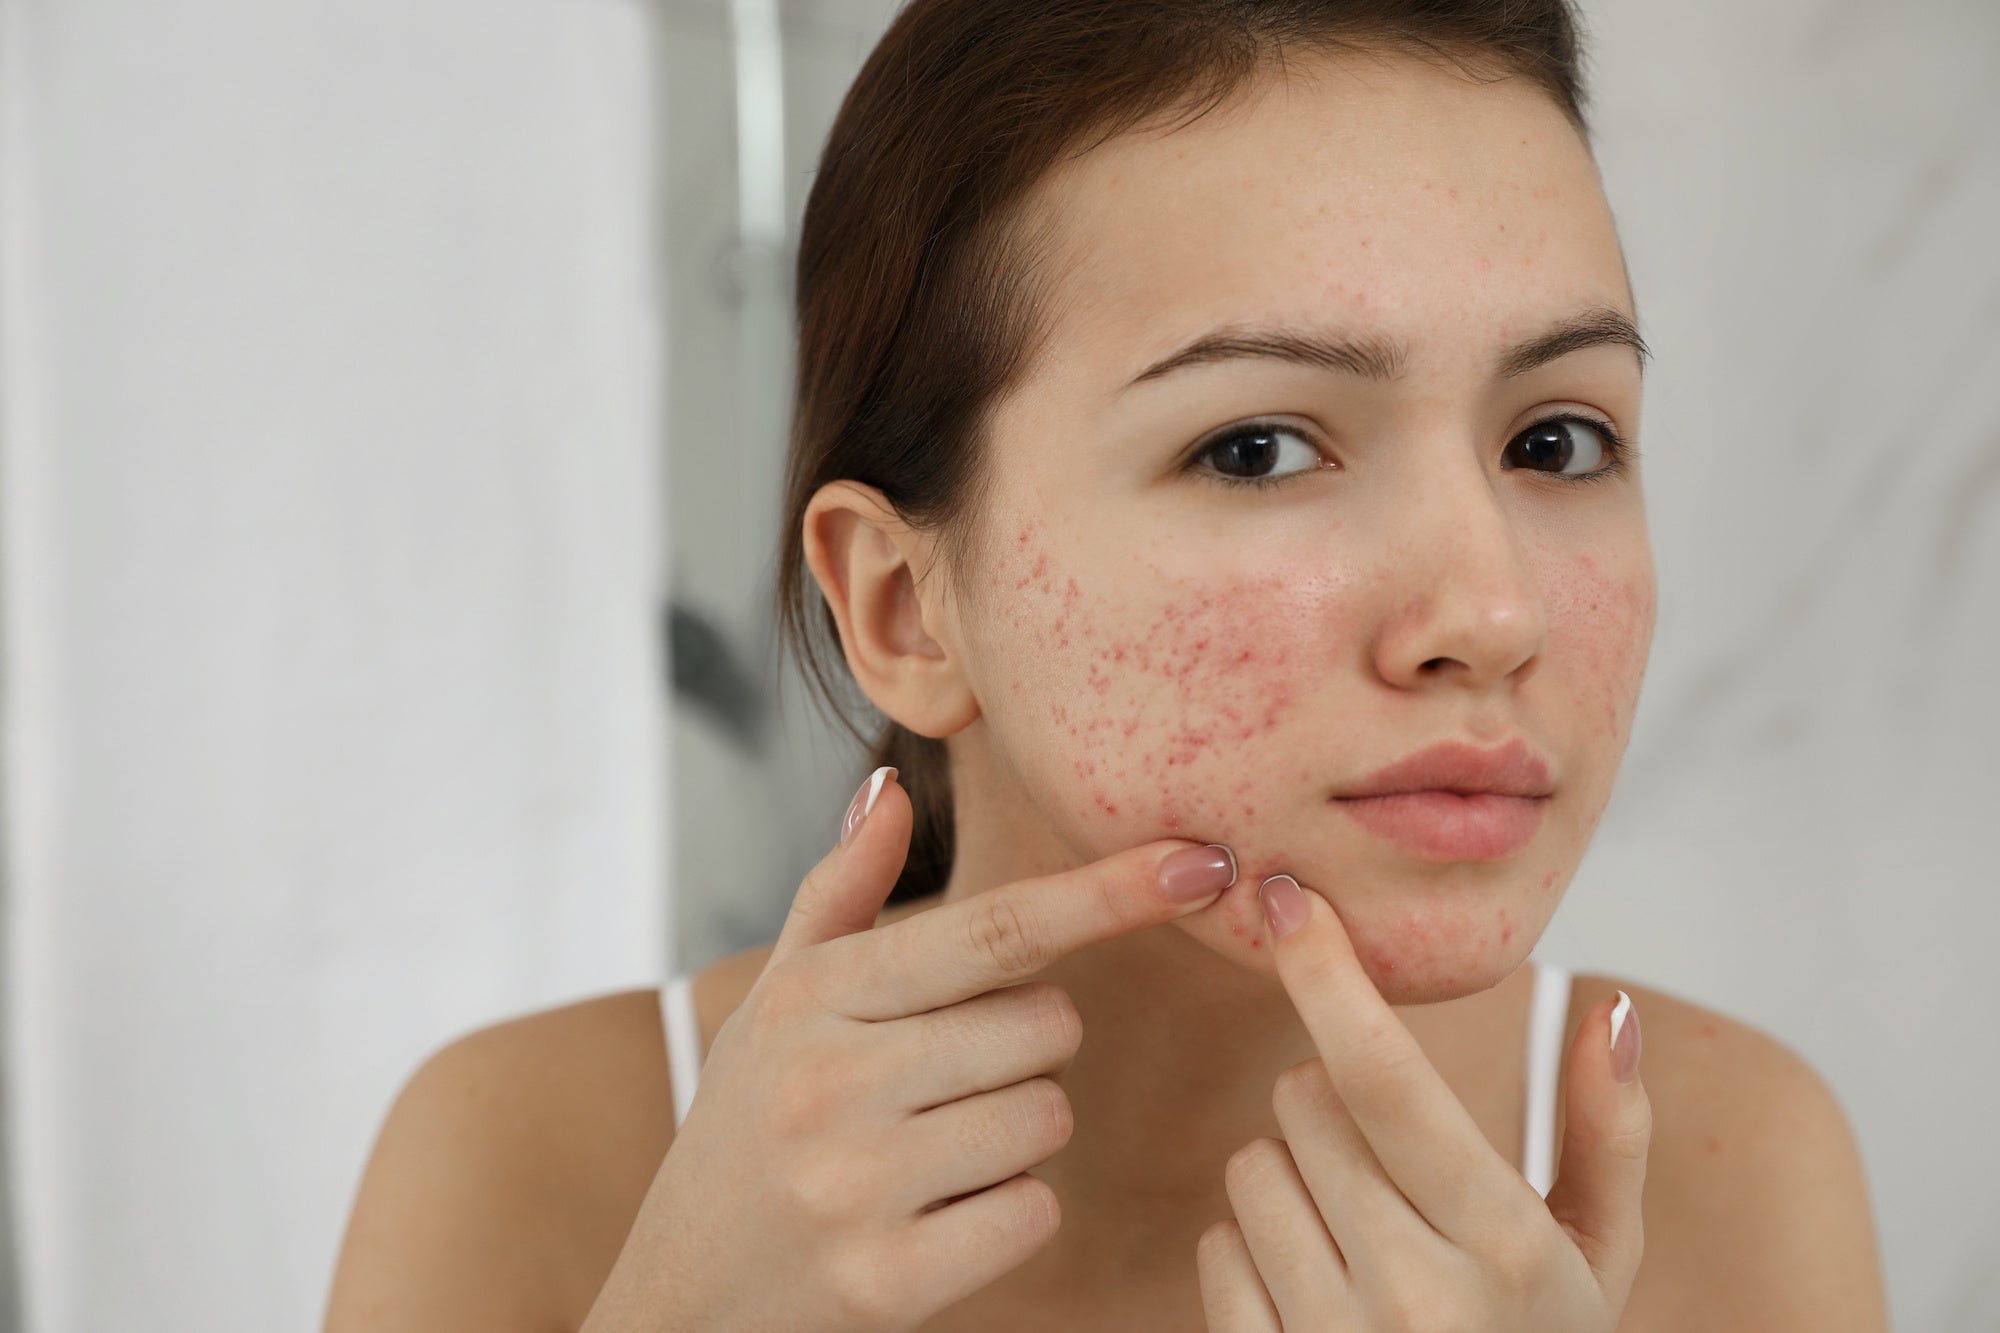 5 Types of Acne Scars - and Why You Should Care Averr Aglow